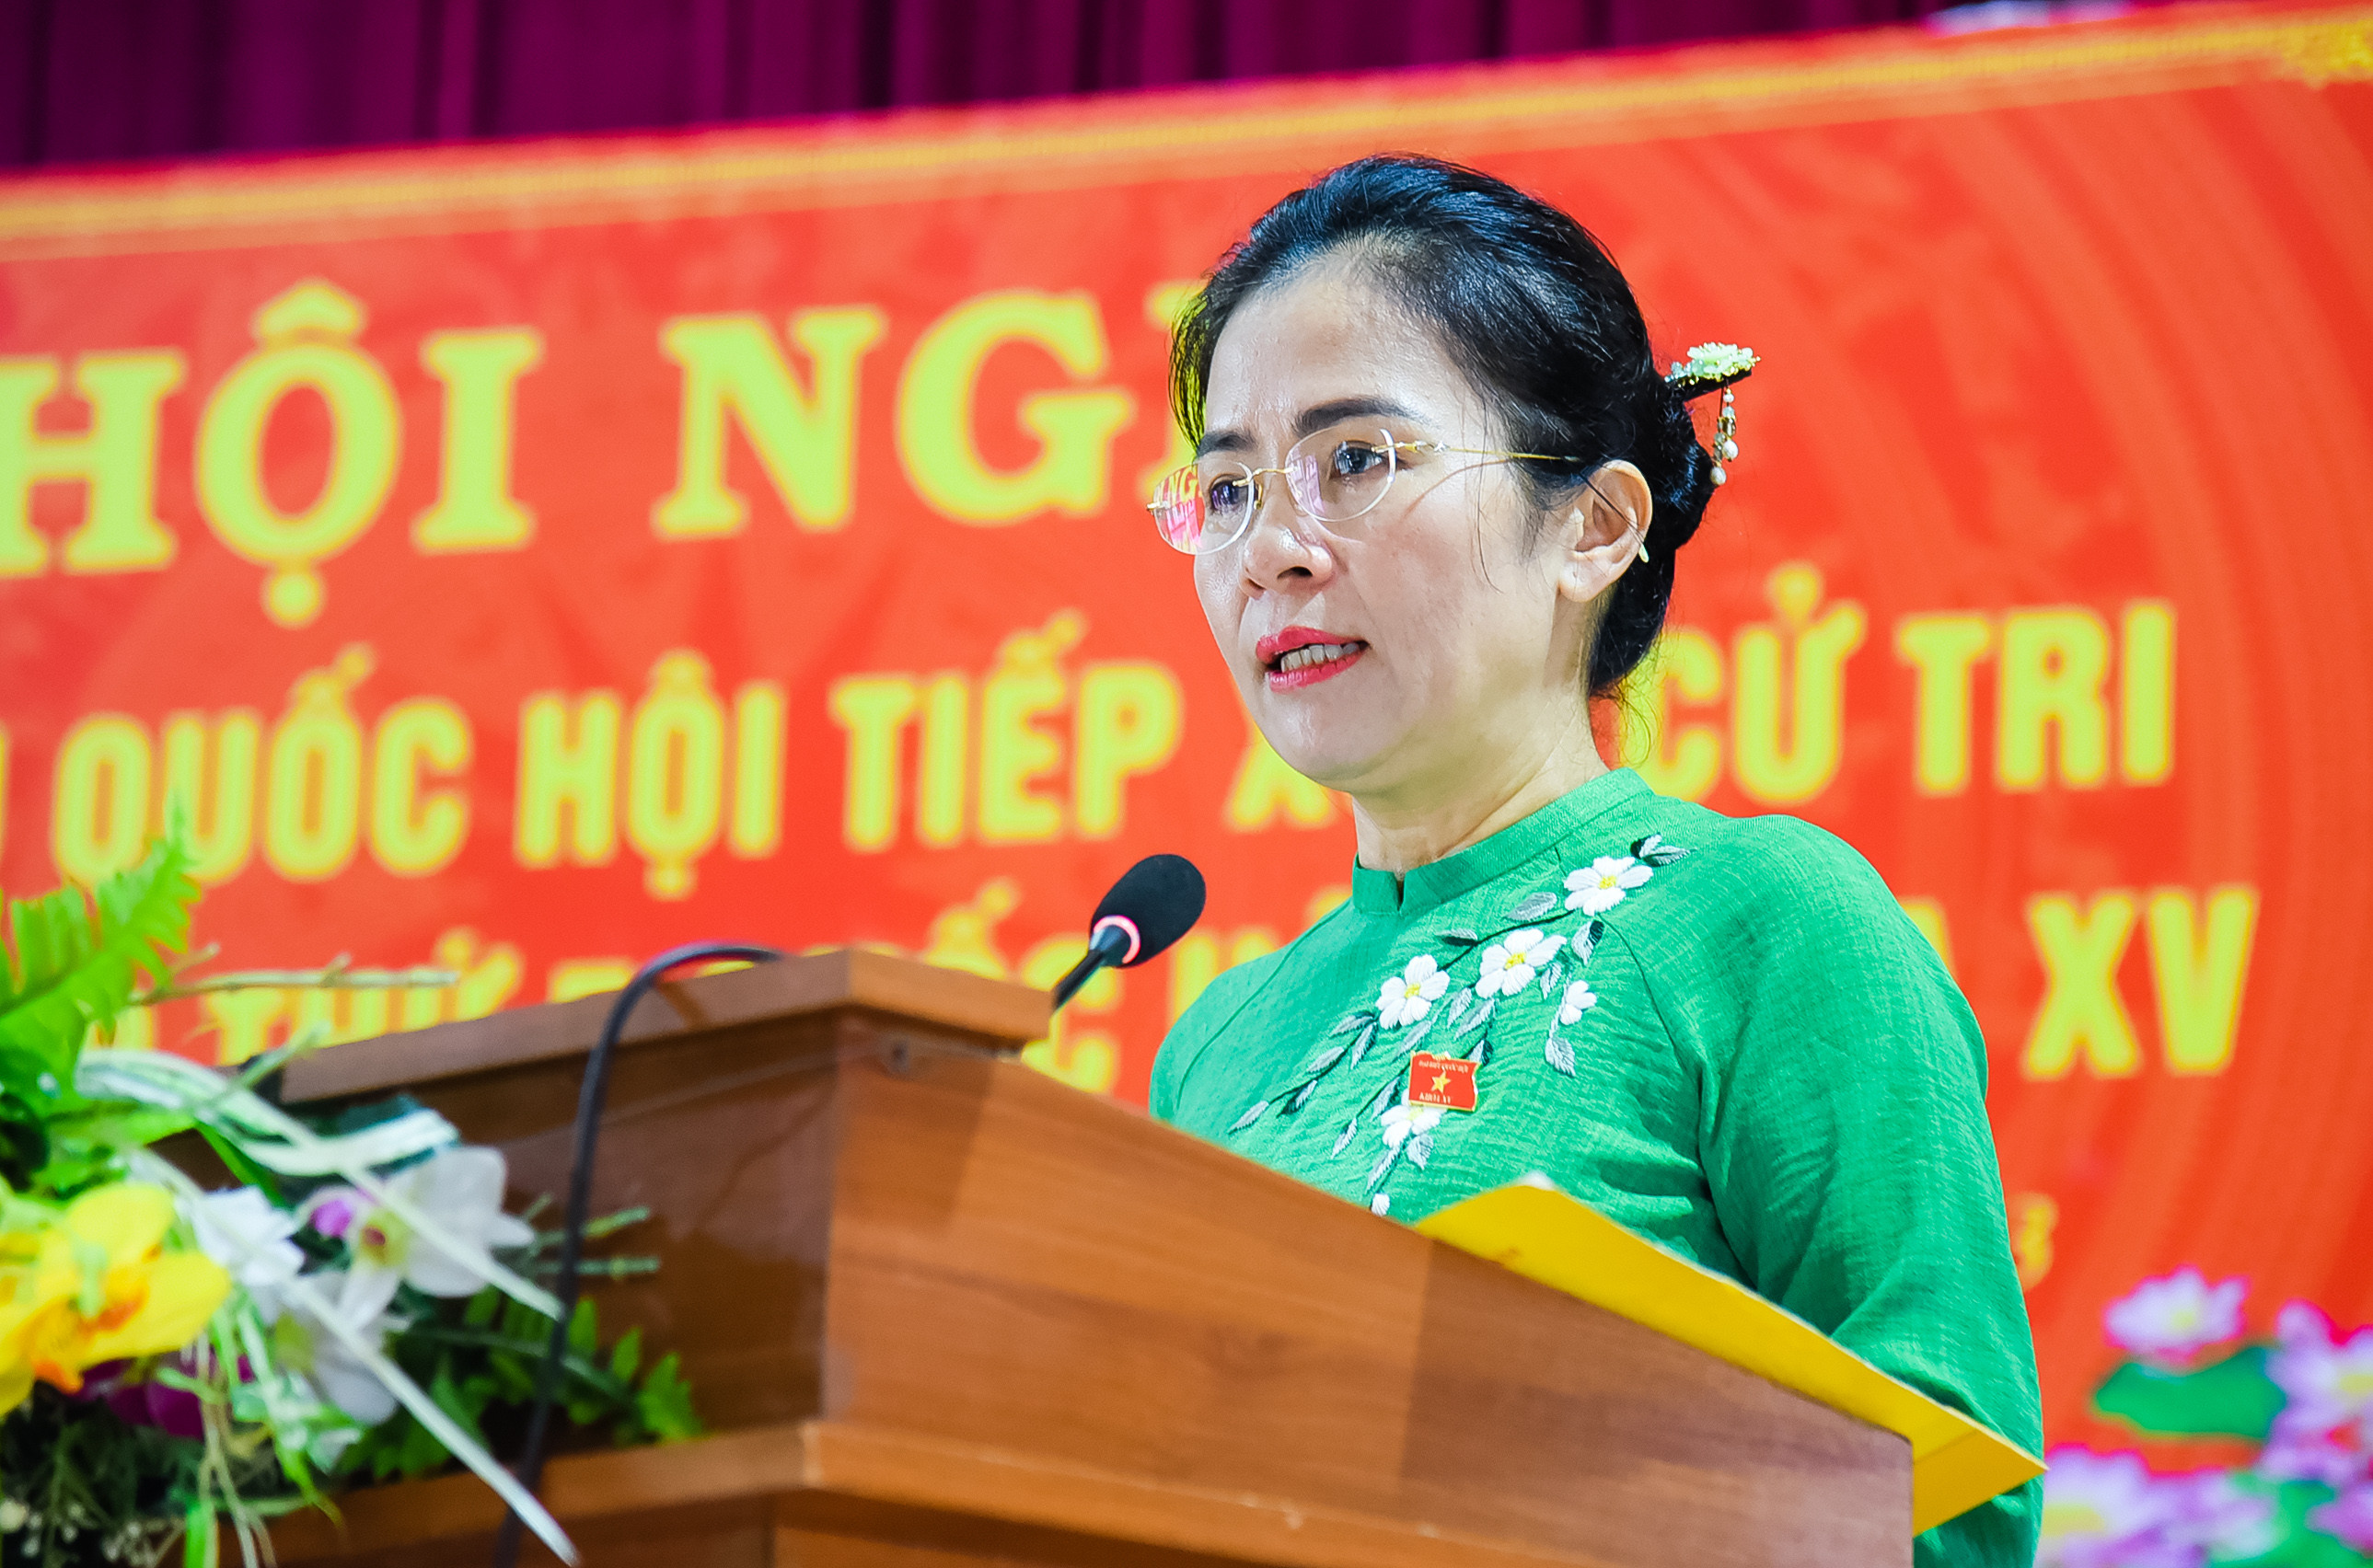 bna_chi sinh. anh thanh le.jpg